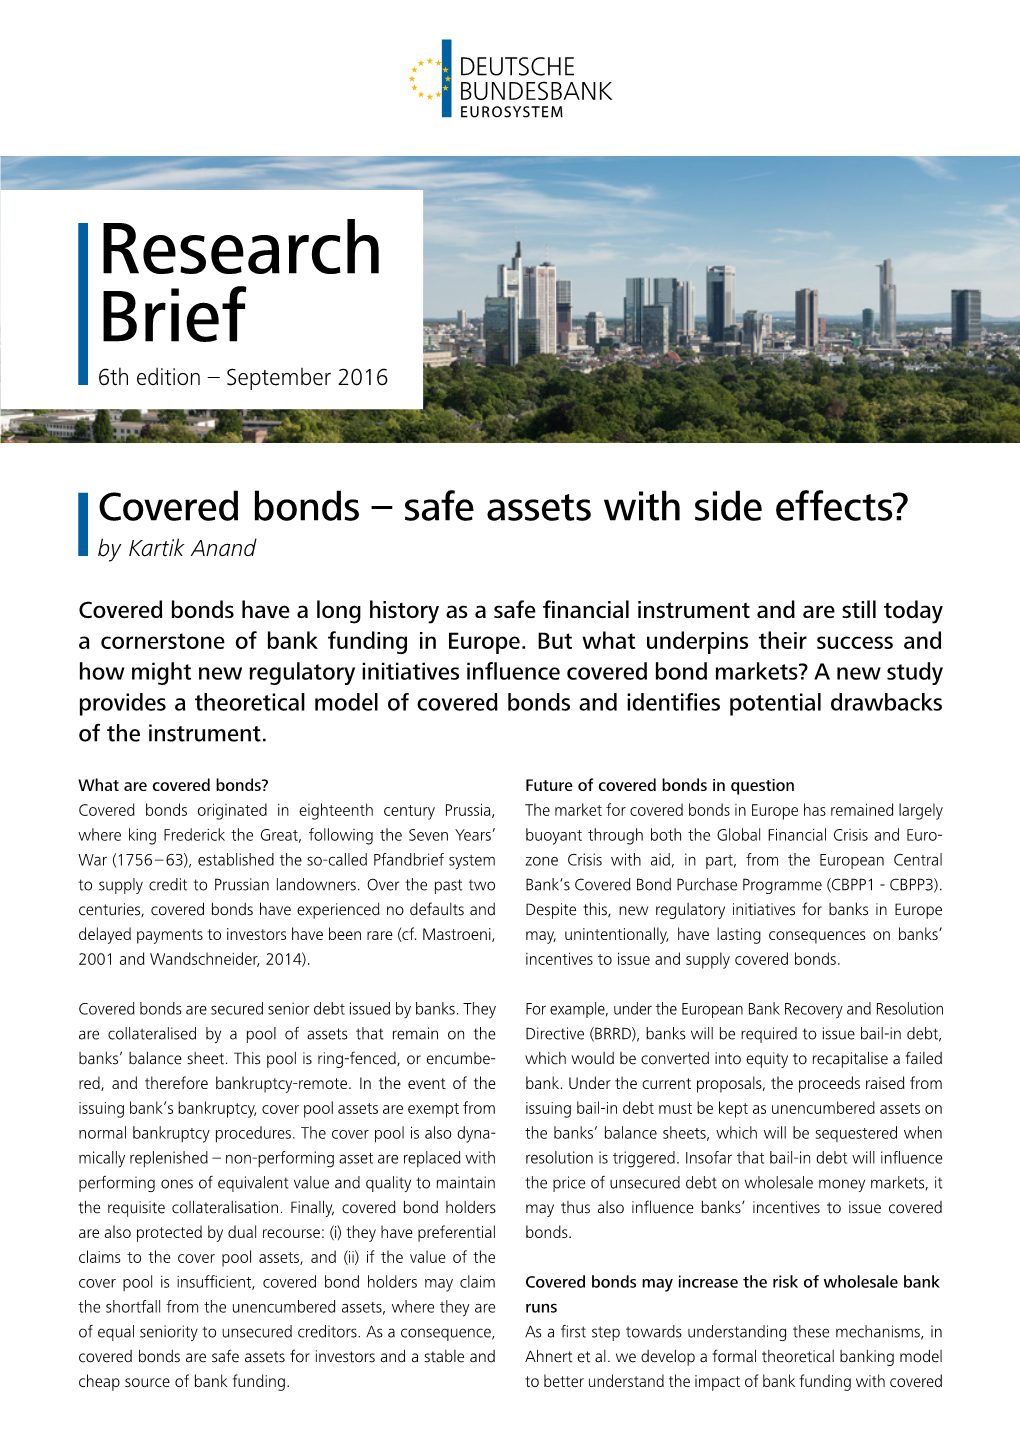 Covered Bonds – Safe Assets with Side Effects? by Kartik Anand